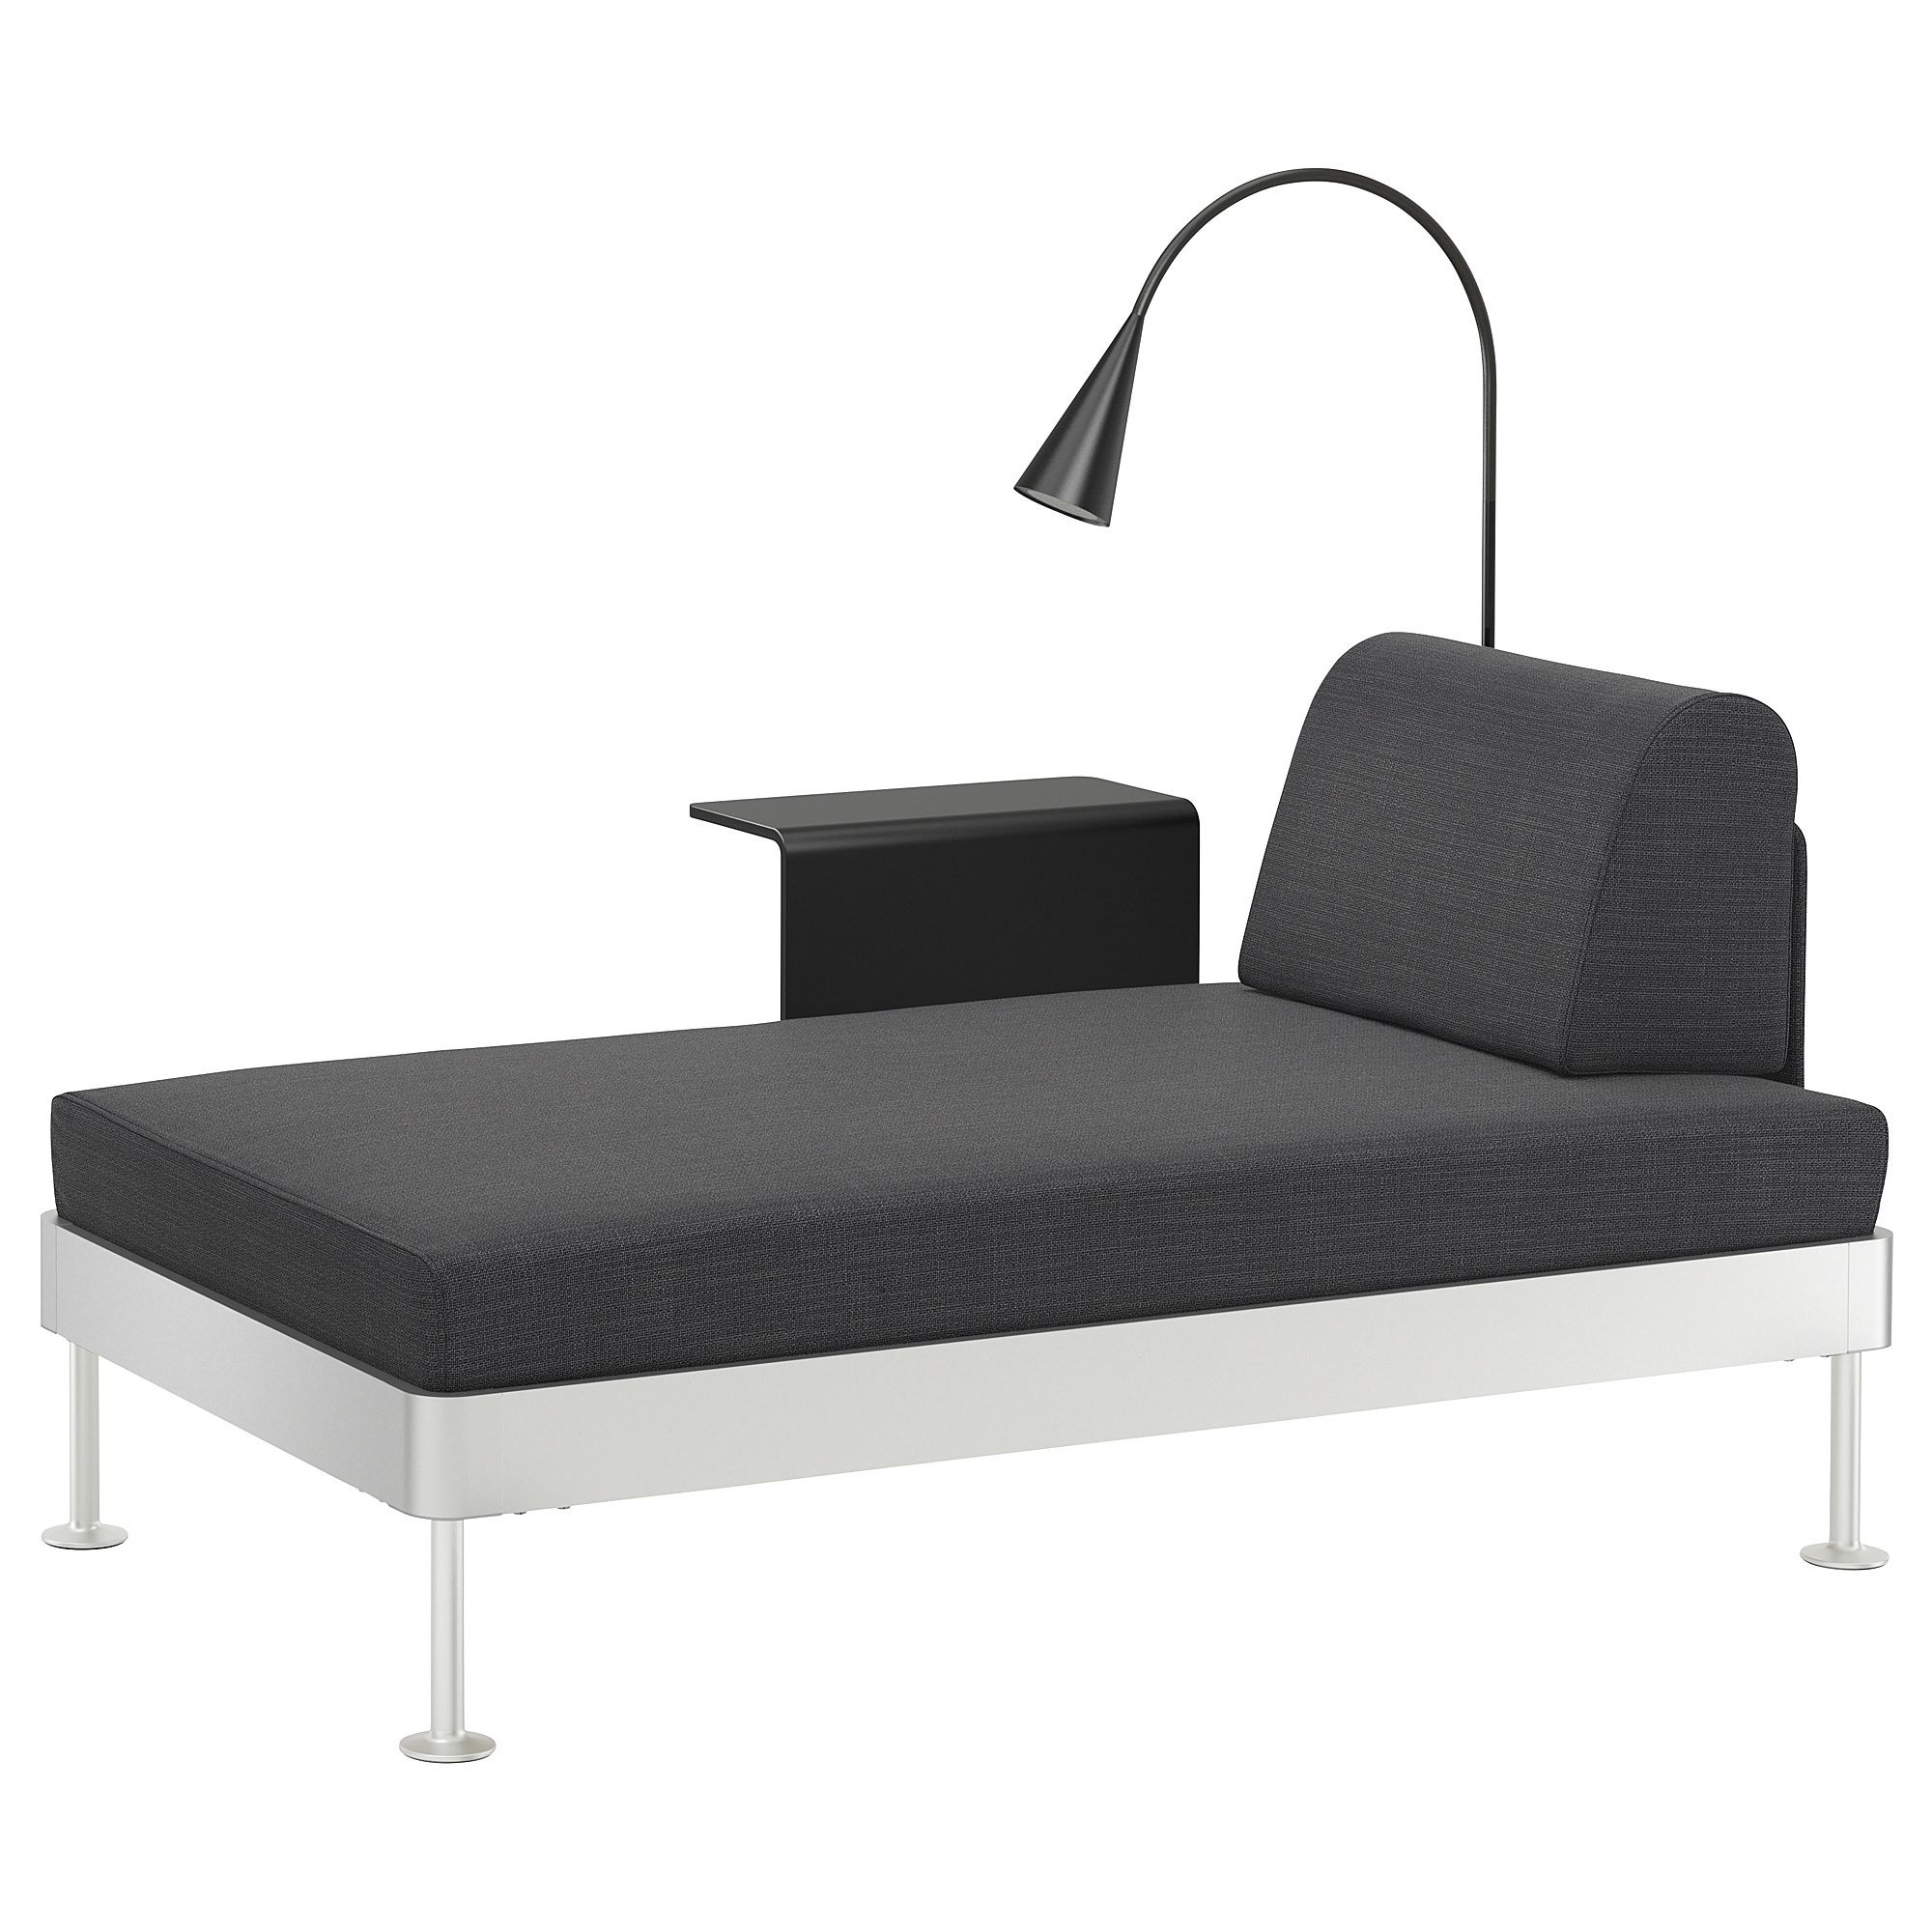 Ikea Chaise Longues For Best And Newest Delaktig Chaise Longue W Side Table And Lamp Hillared Anthracite (View 6 of 15)